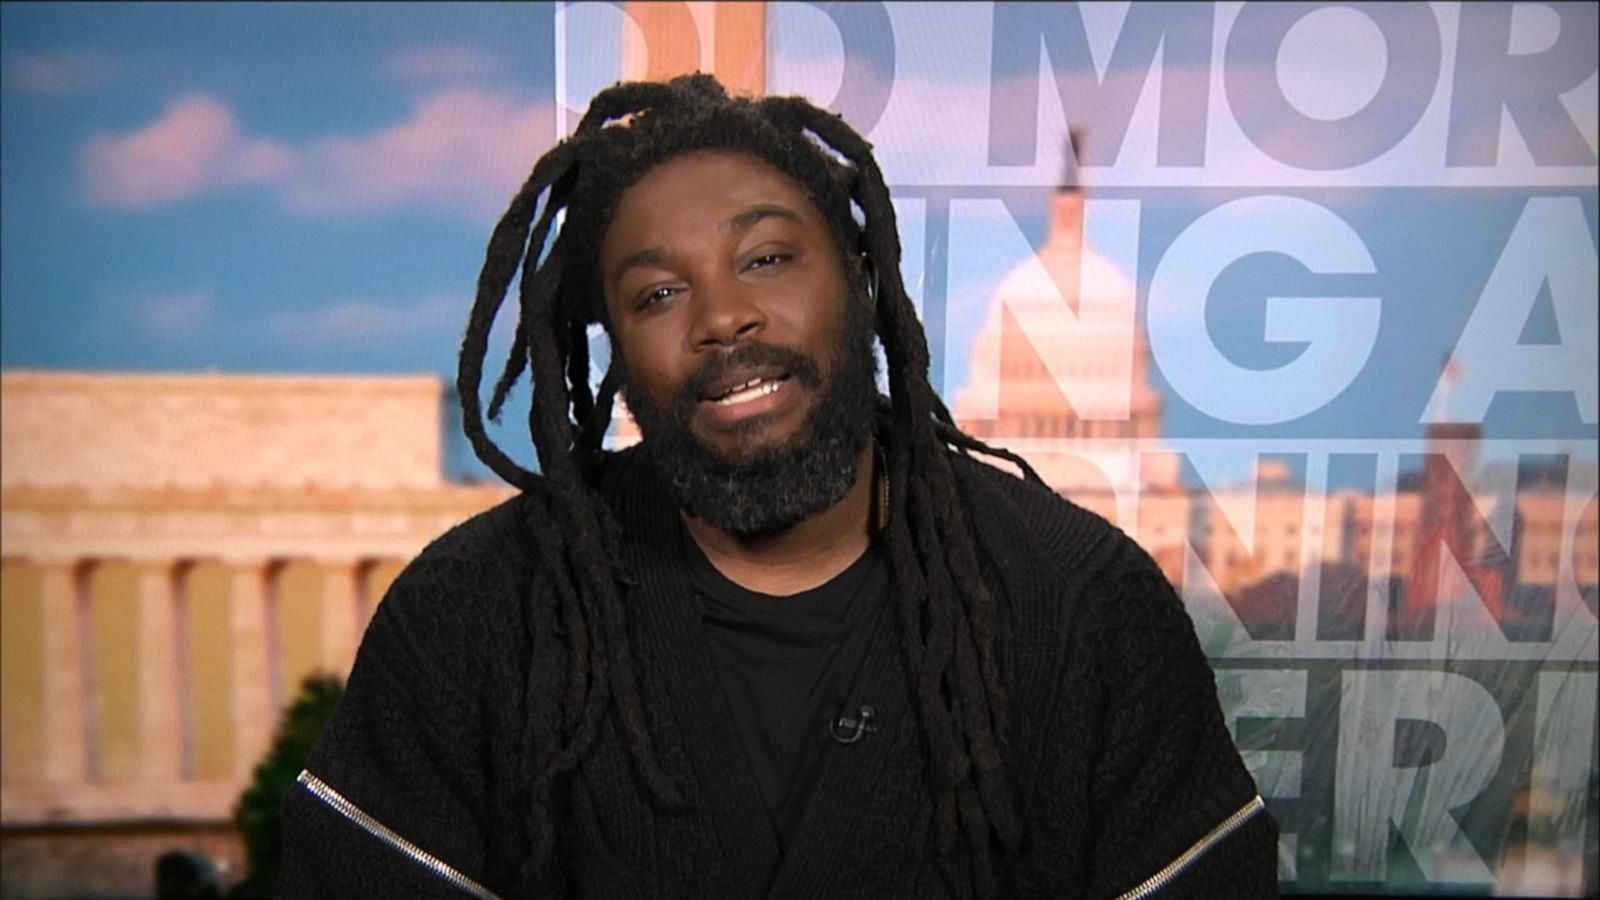 Jason Reynolds Is Just Getting Started